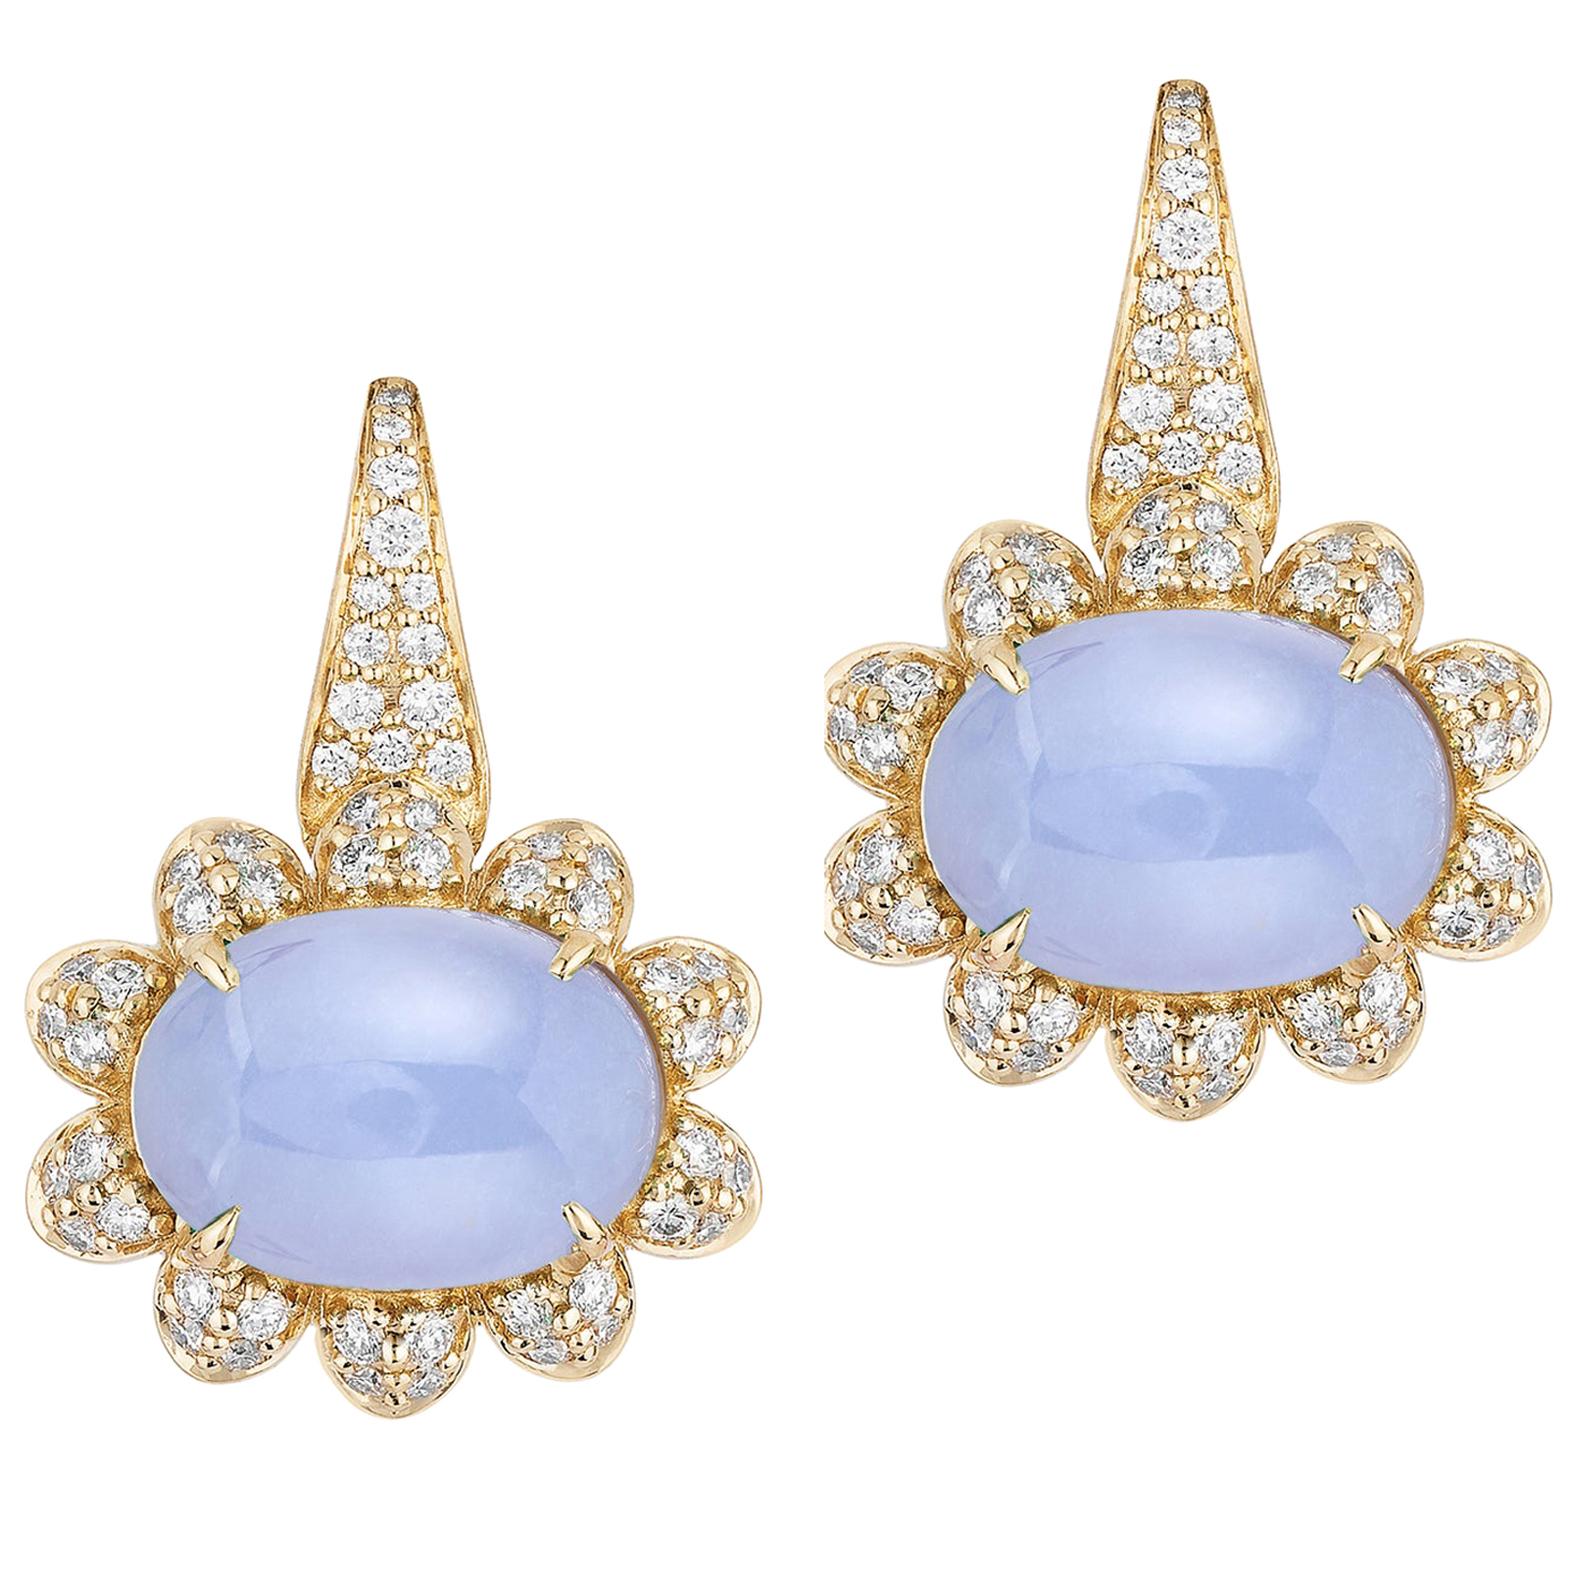 Goshwara Oval Cabochon Blue Chalcedony and Diamond Earrings For Sale